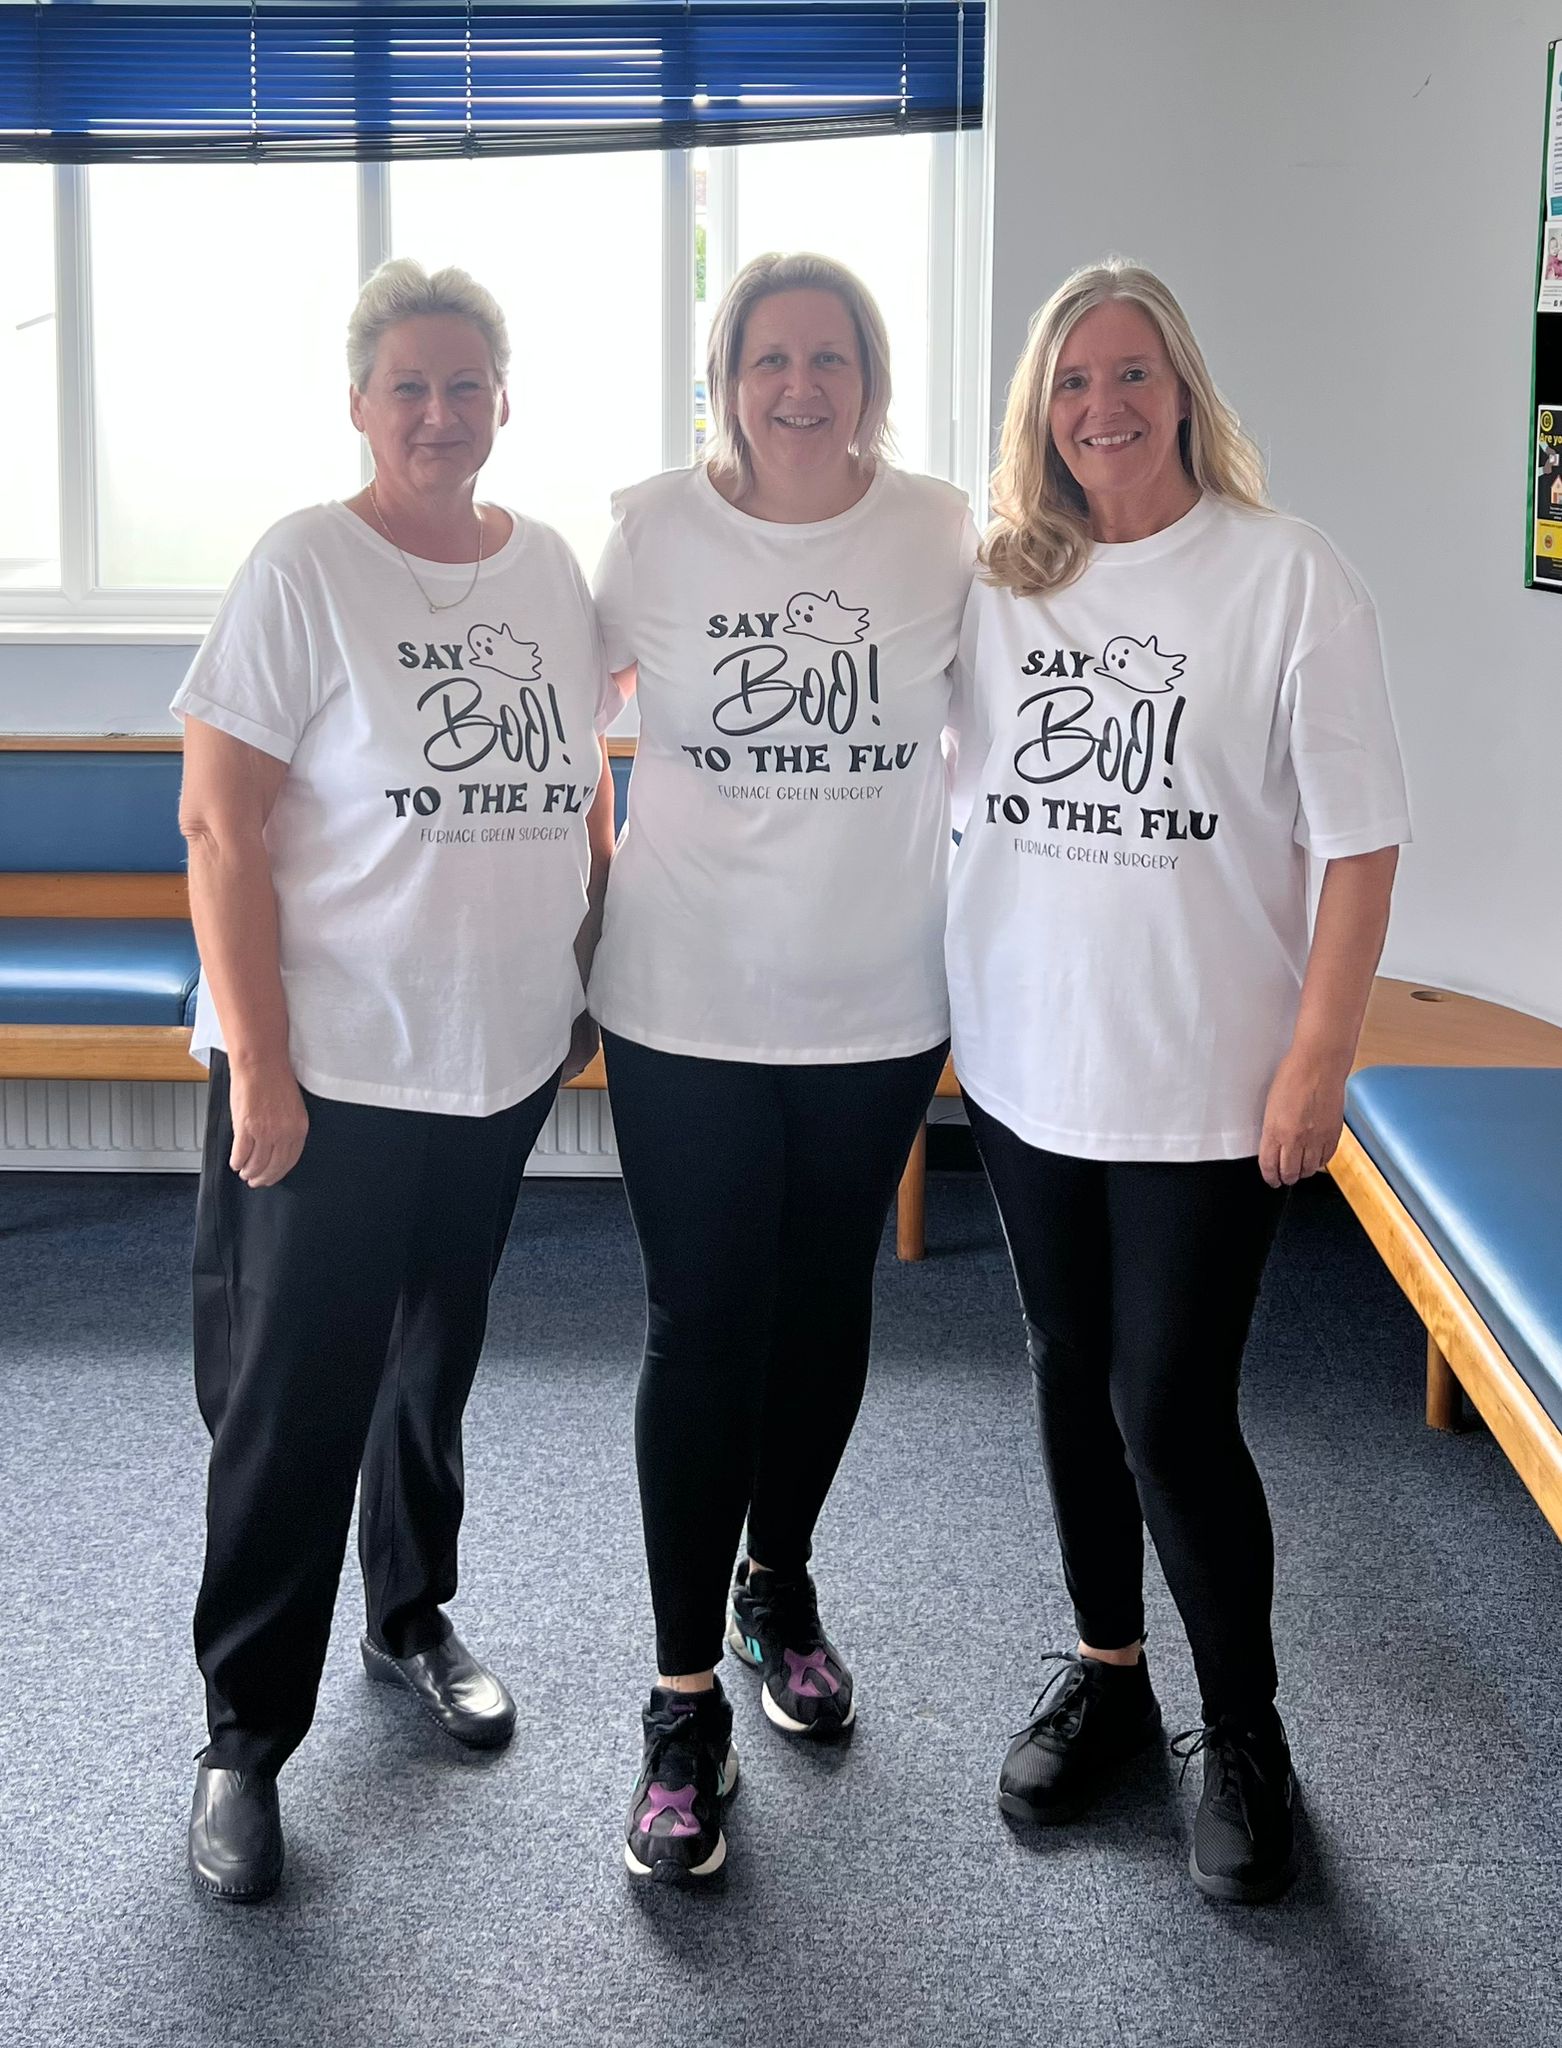 A photograph of three of our nurses in our reception. They are all wearing white t-shirts with a design printed in black. It says "Say Boo! to the flu" with a little cartoon ghost flying above the word 'Boo!' Below the design it says Furnace Green Surgery. They are all smiling at the camera.